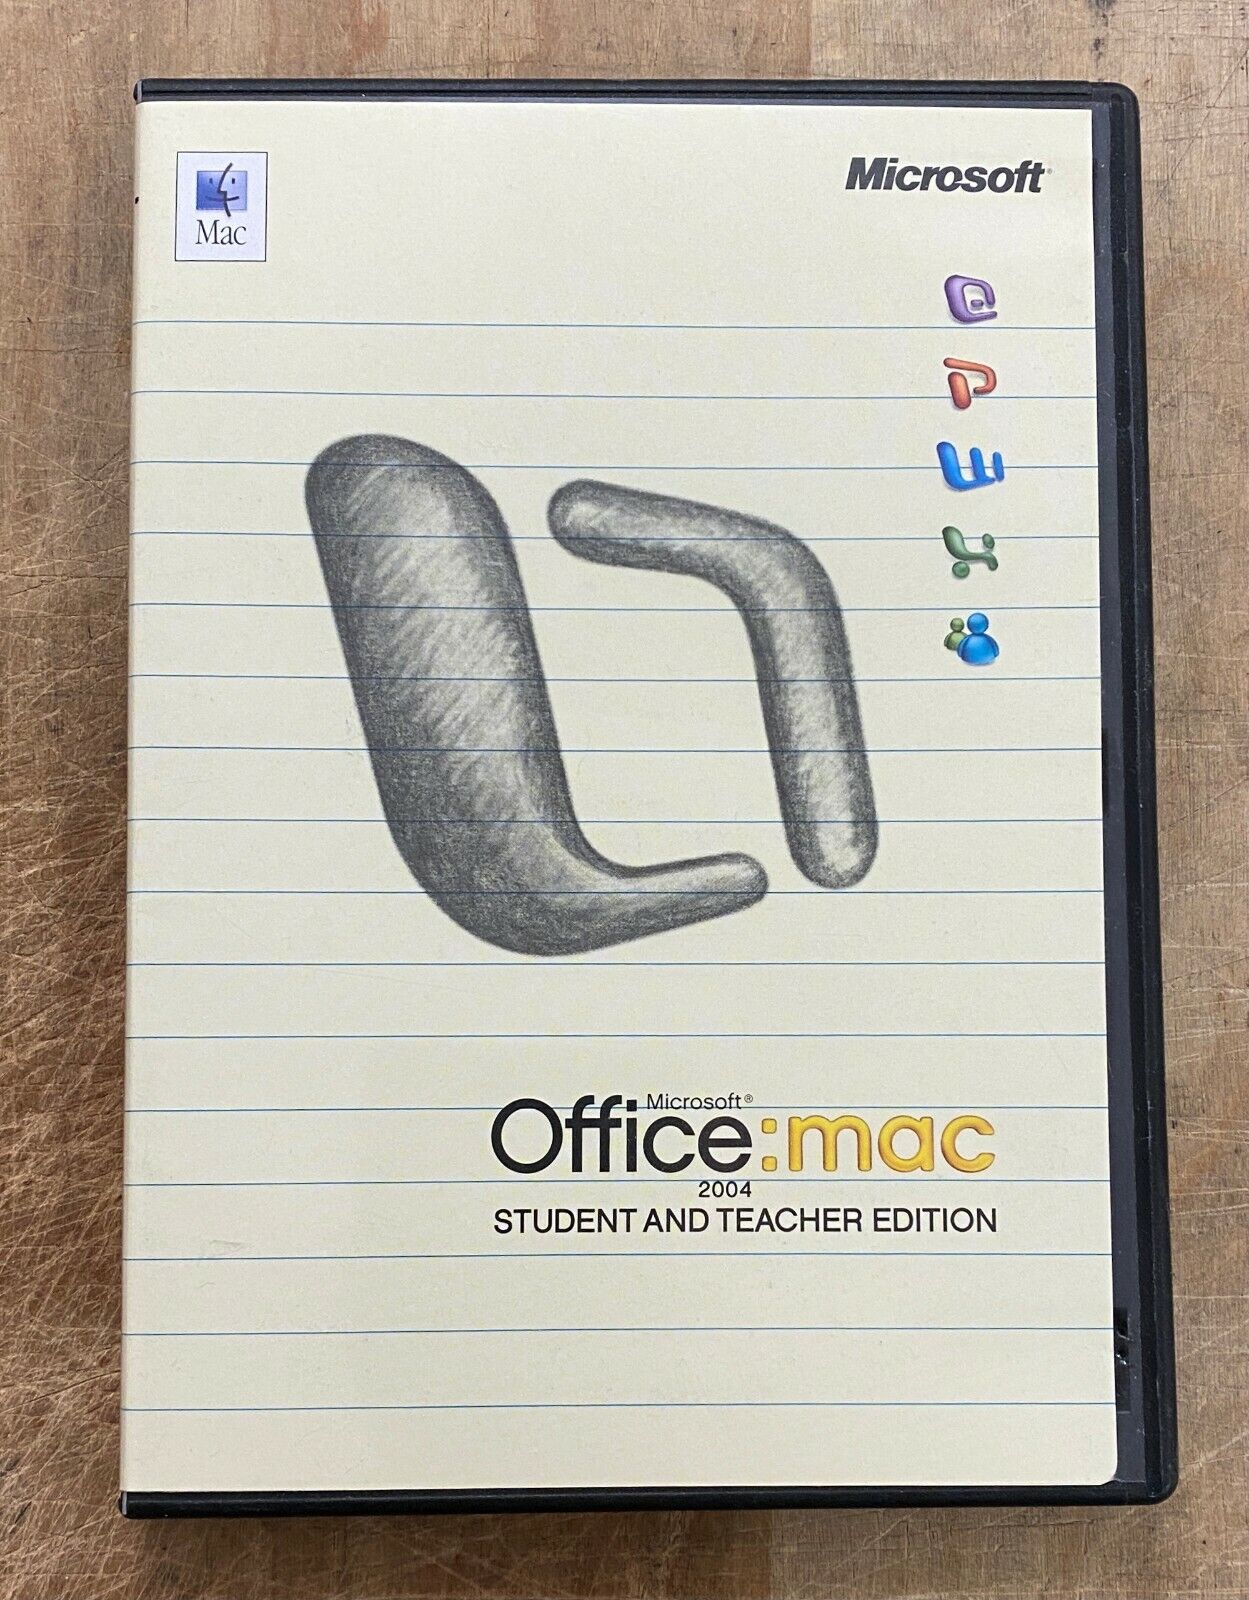 Microsoft Office 2004 Home and Student Edition for Mac w/3 Product Keys